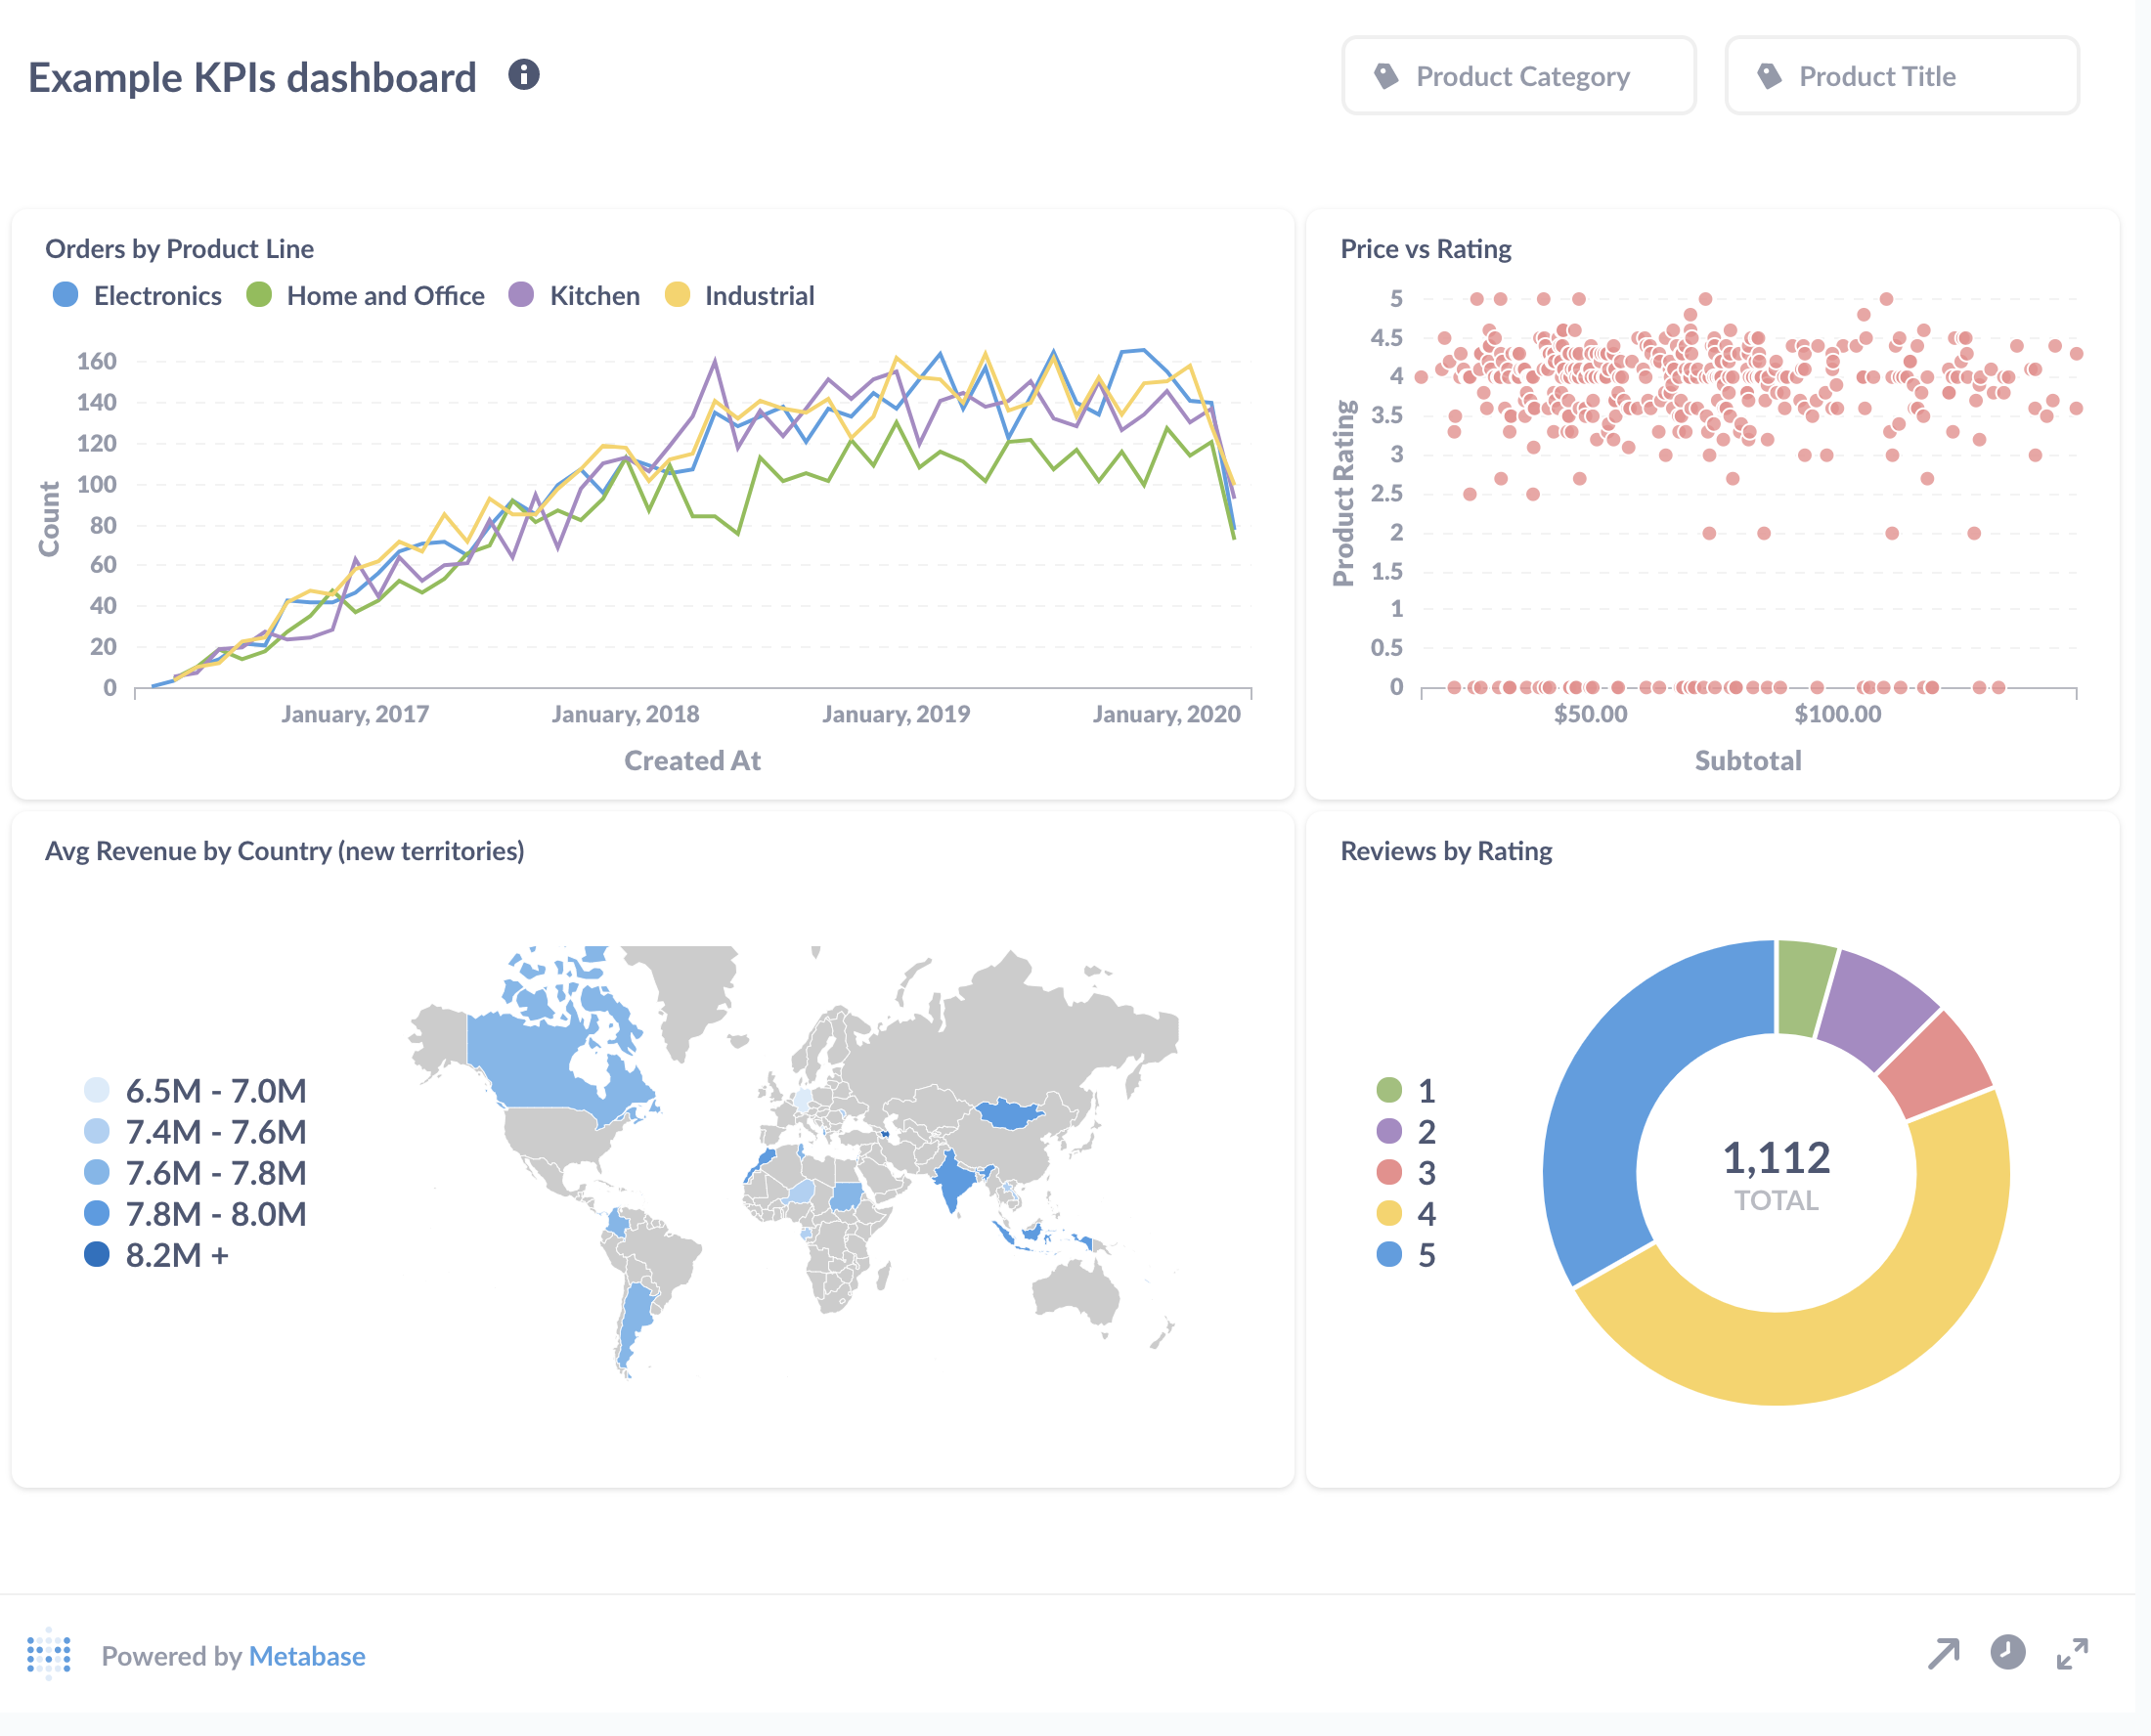 An example of using a public link to share a dashboard, with the Powered by Metabase footer.